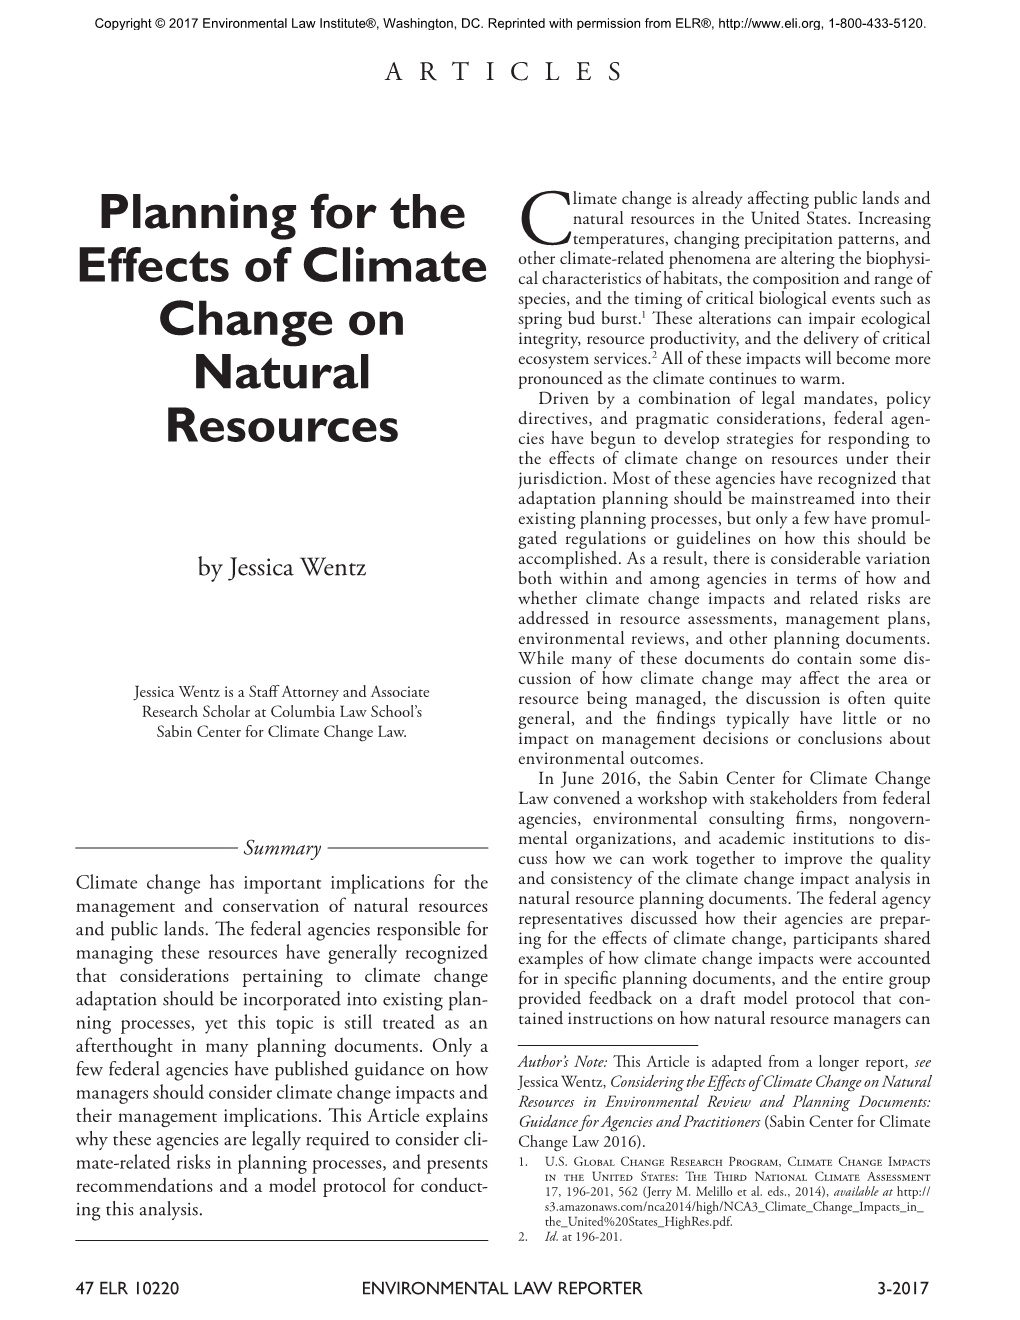 Planning for the Effects of Climate Change on Natural Resources